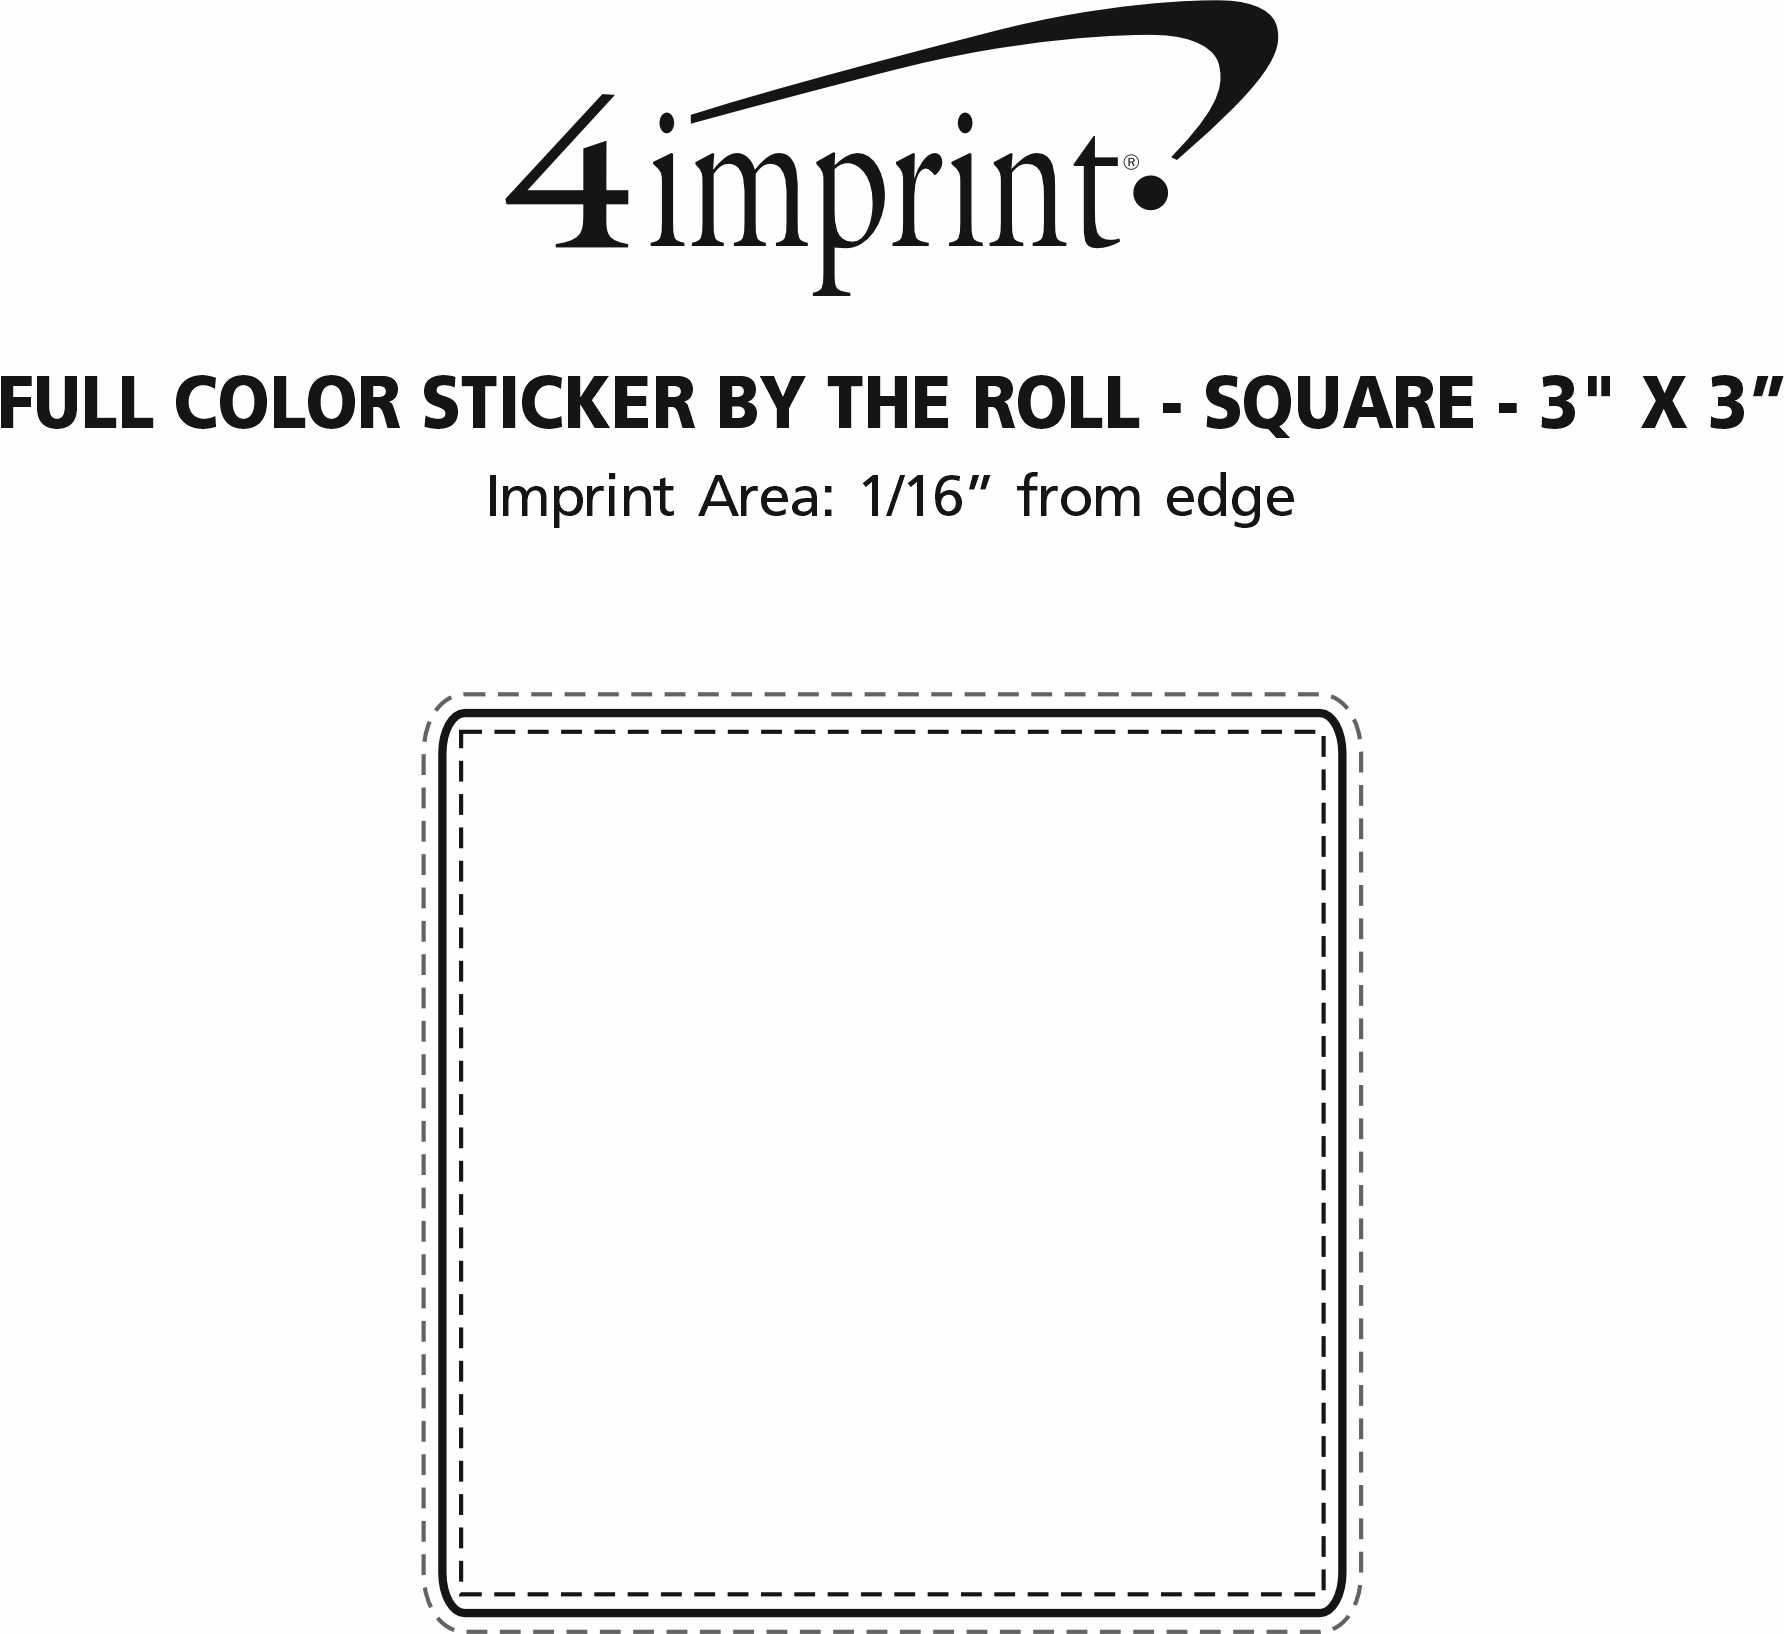 Imprint Area of Full Color Sticker by the Roll - Square - 3" x 3"